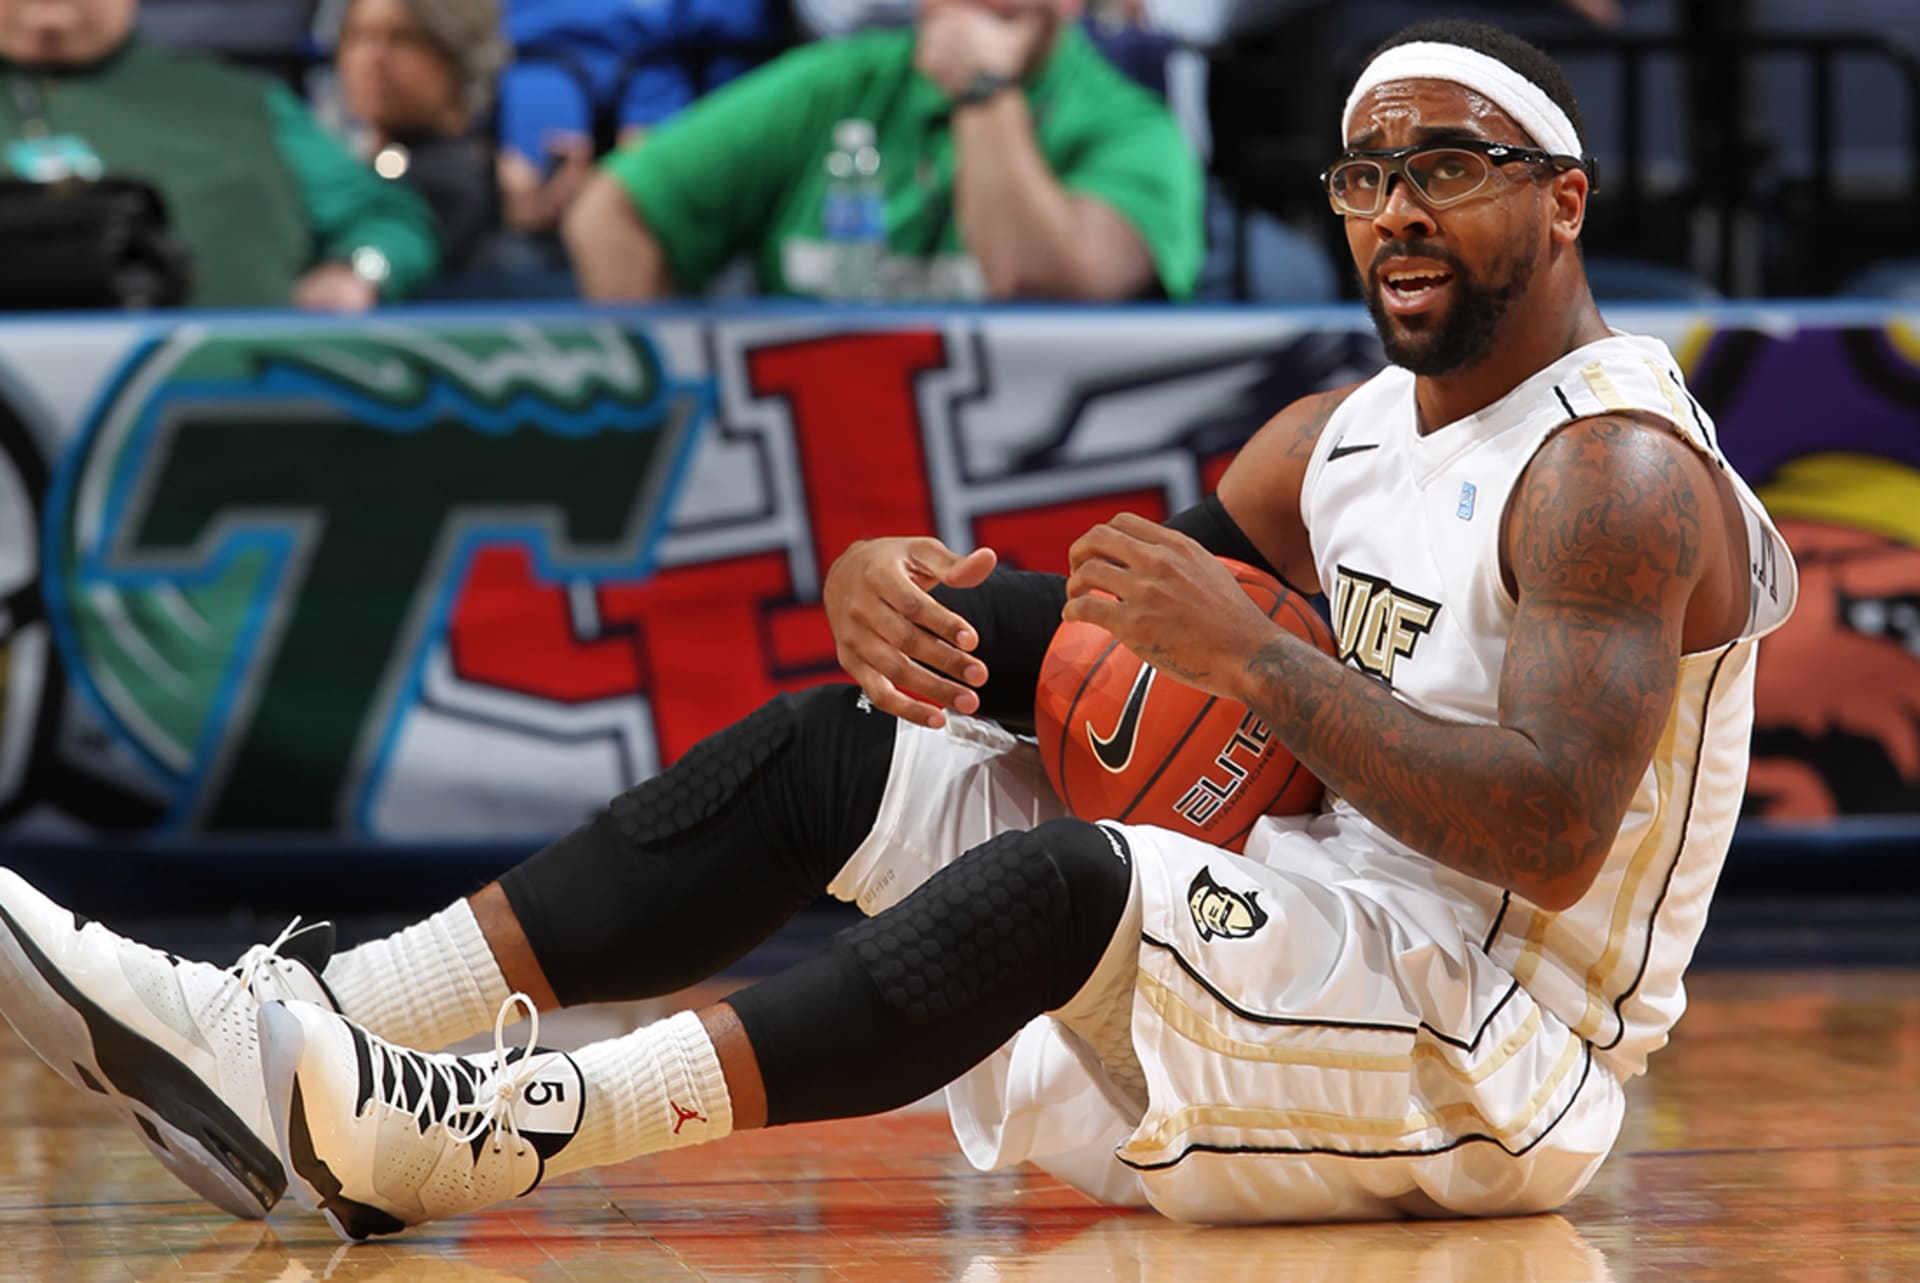 How Marcus Jordan Wore a Pair of Air Jordans and Cost UCF $3M adidas Deal | Complex